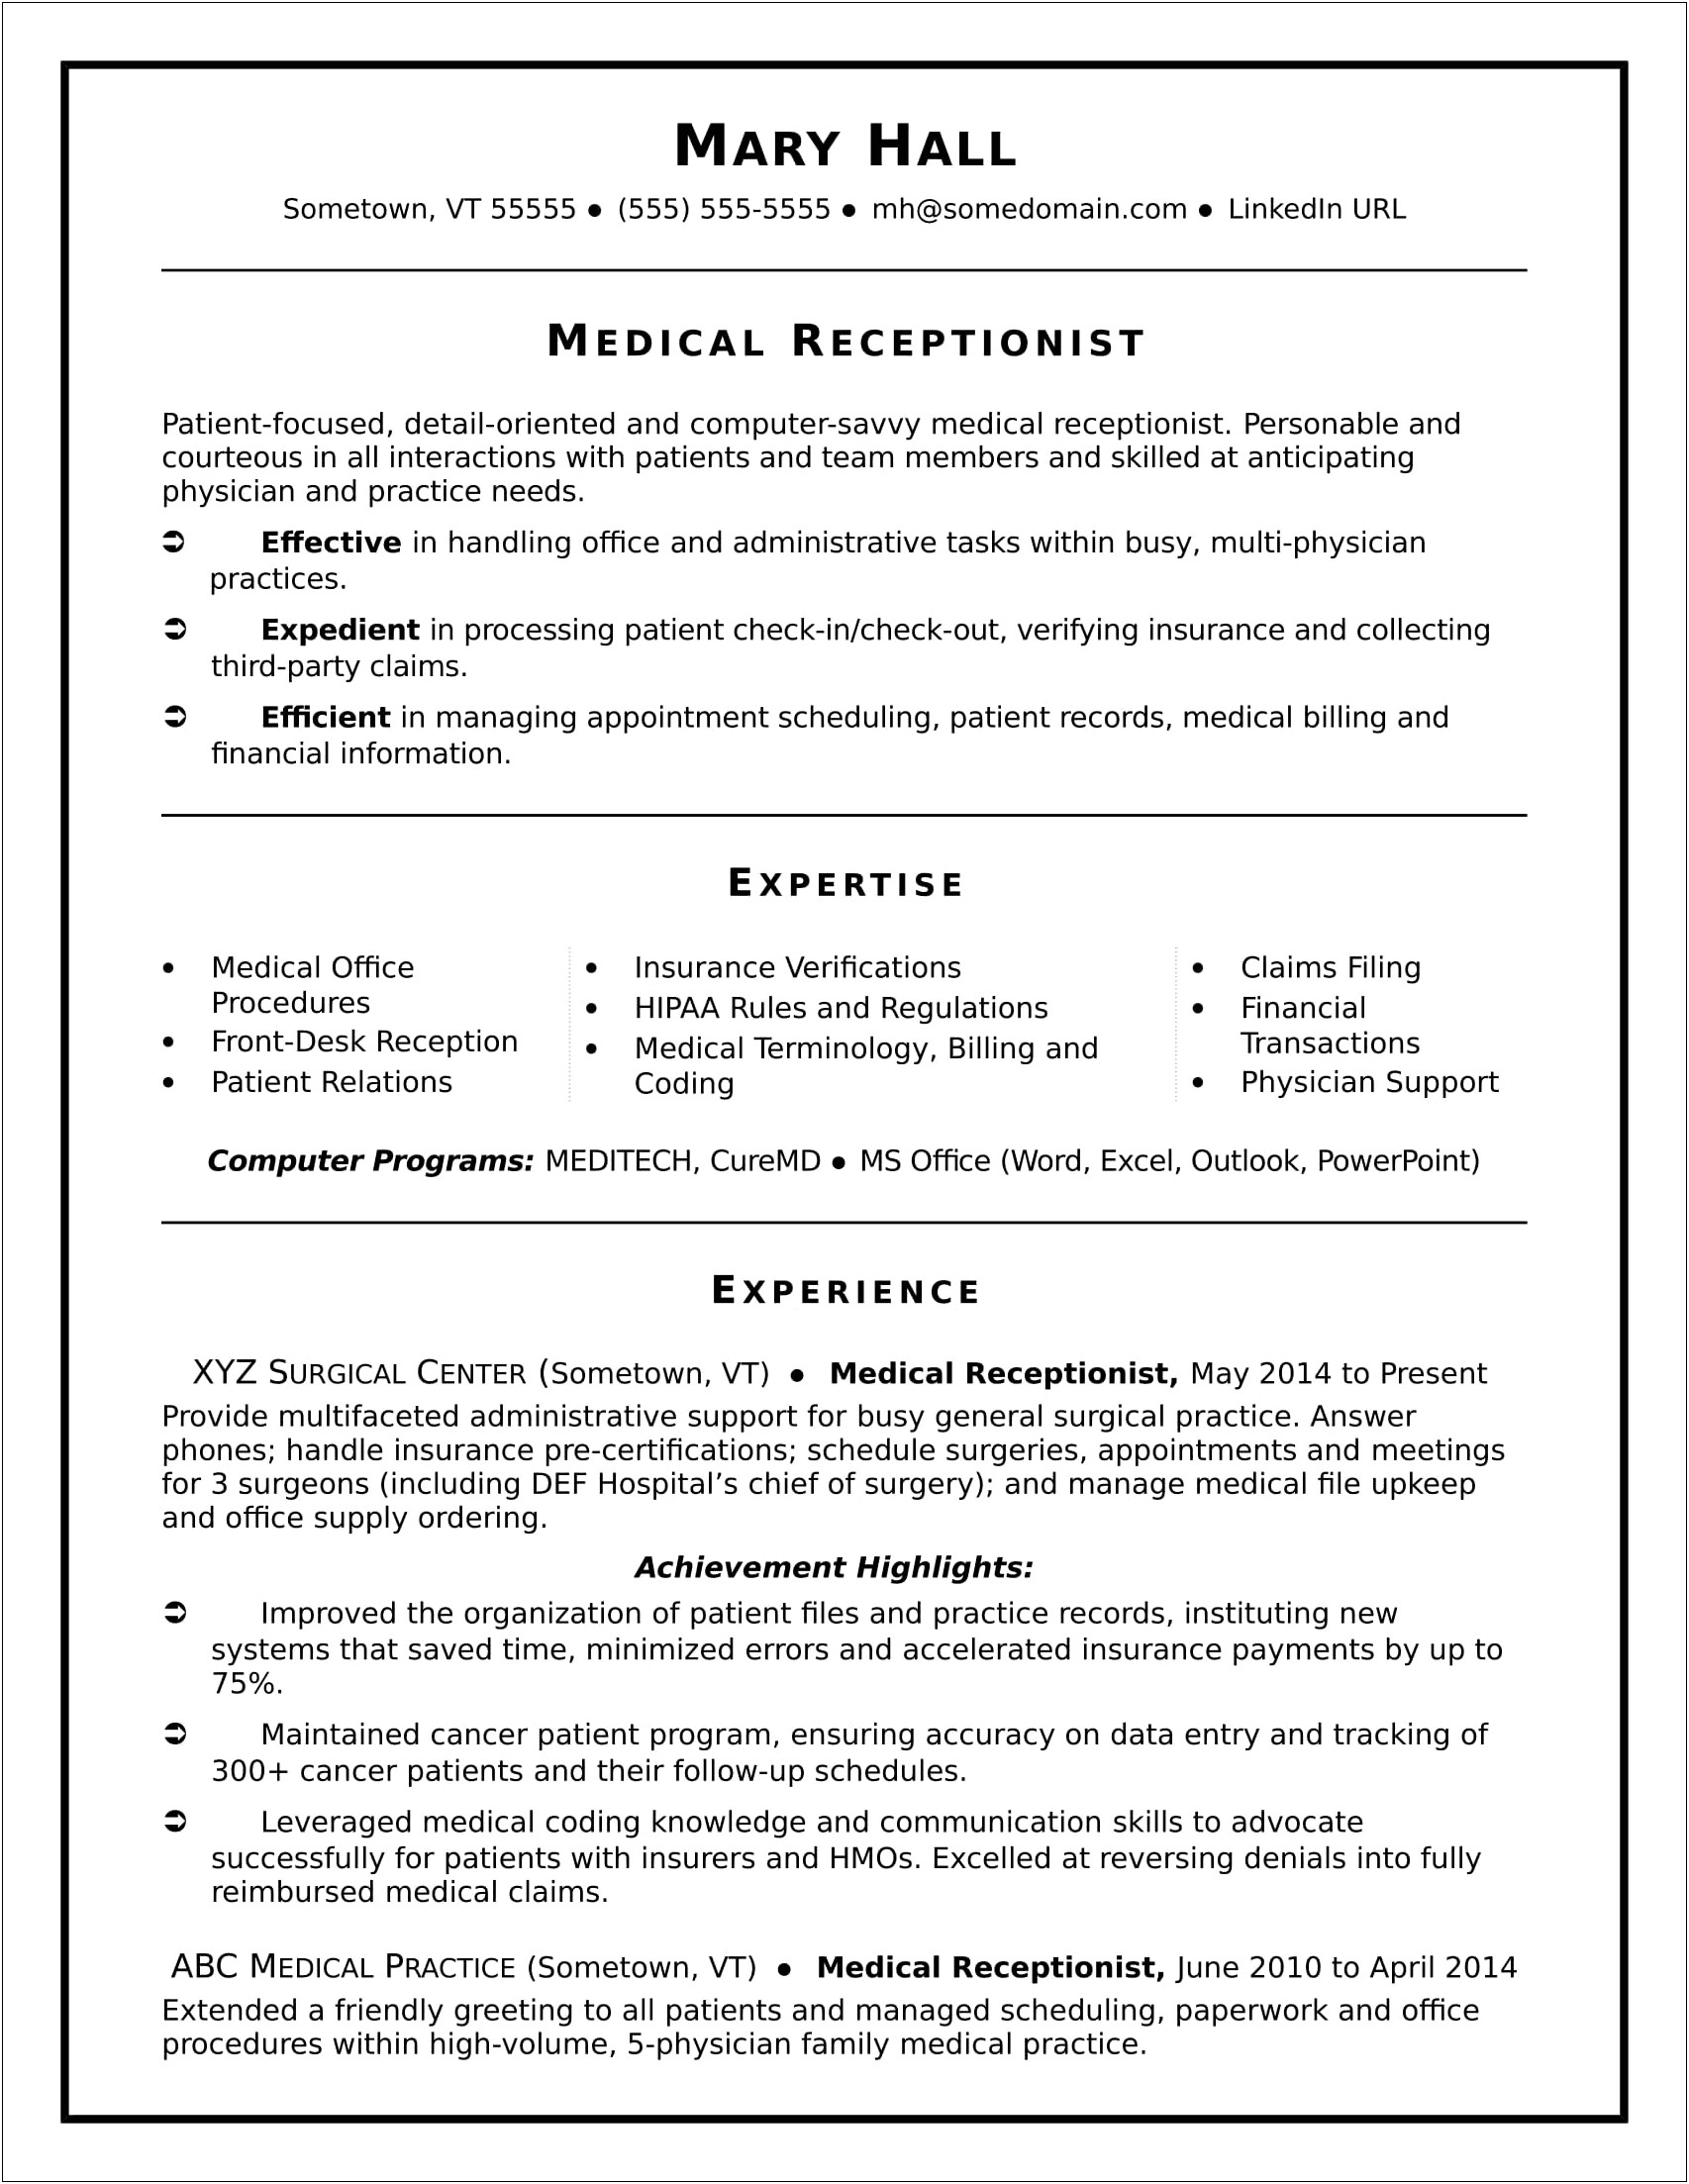 Healthcare Administration Sample Resume Out Of College